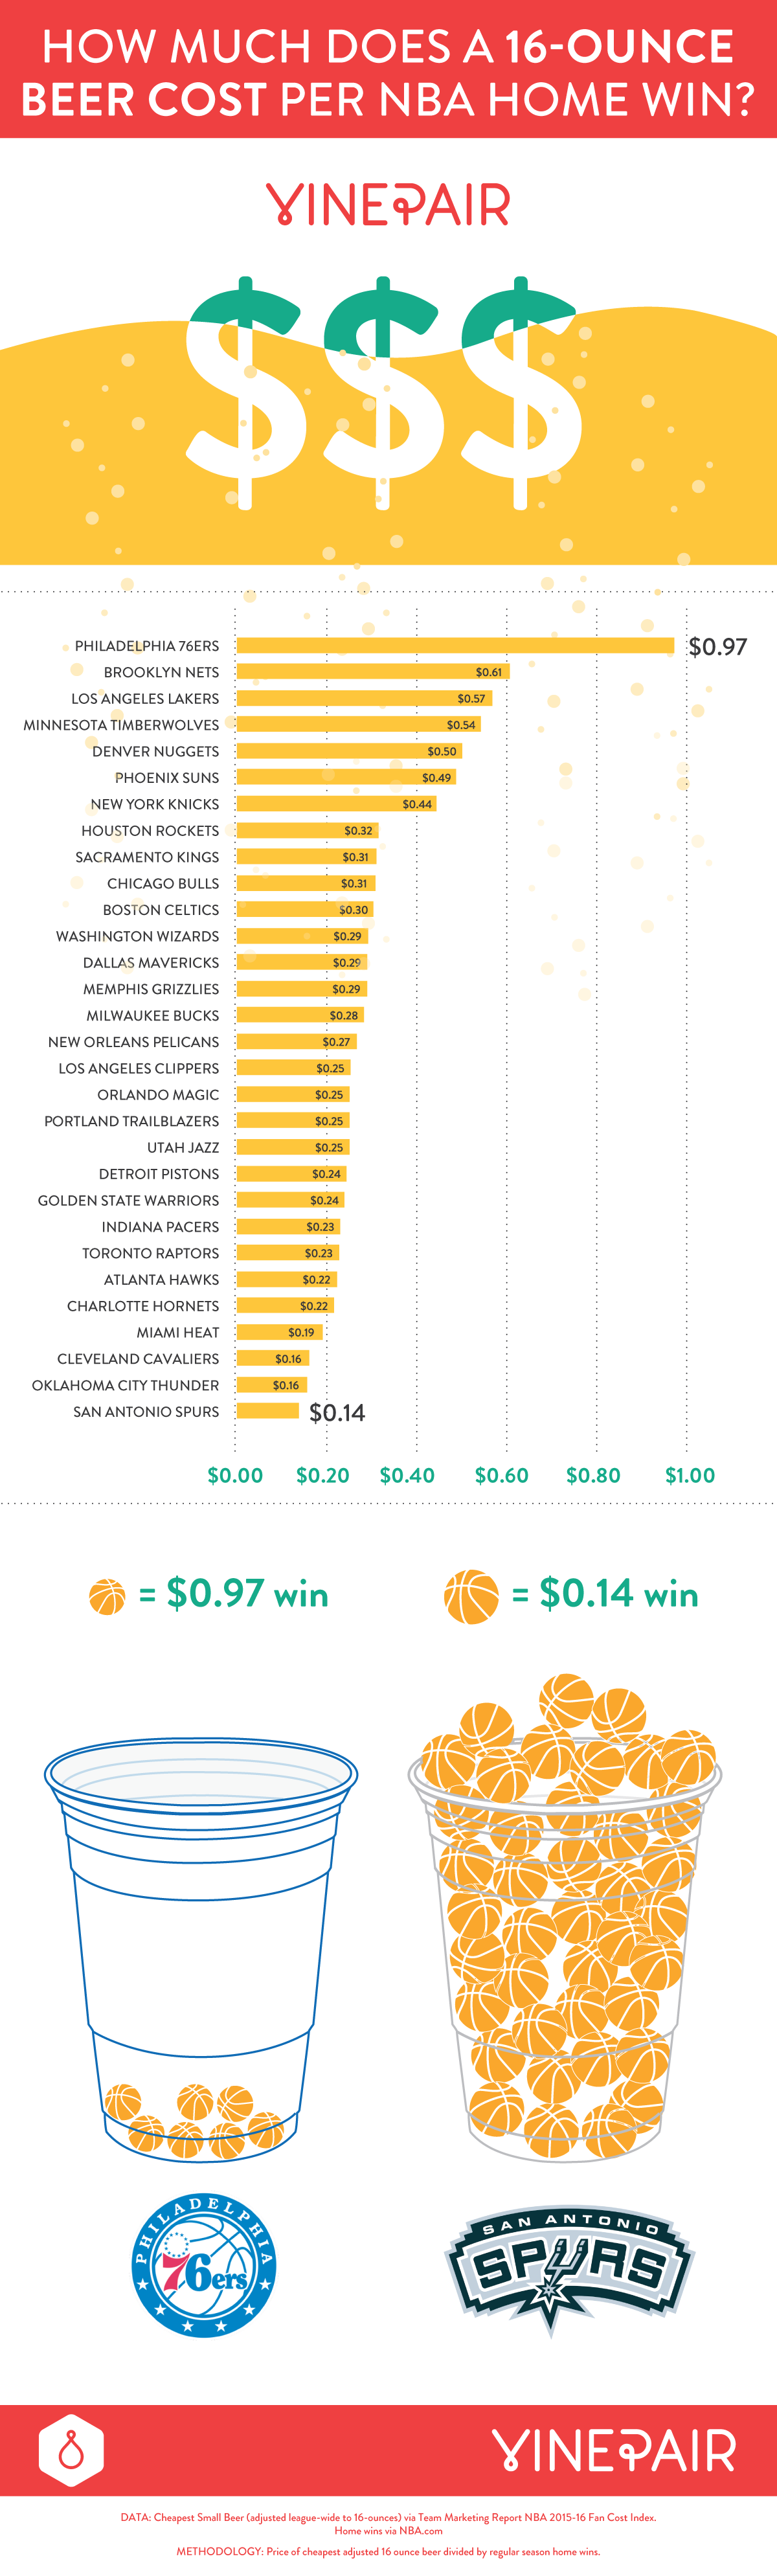 How Much Does A 16 Ounce Beer Cost Per Win In The NBA? [Infographic]